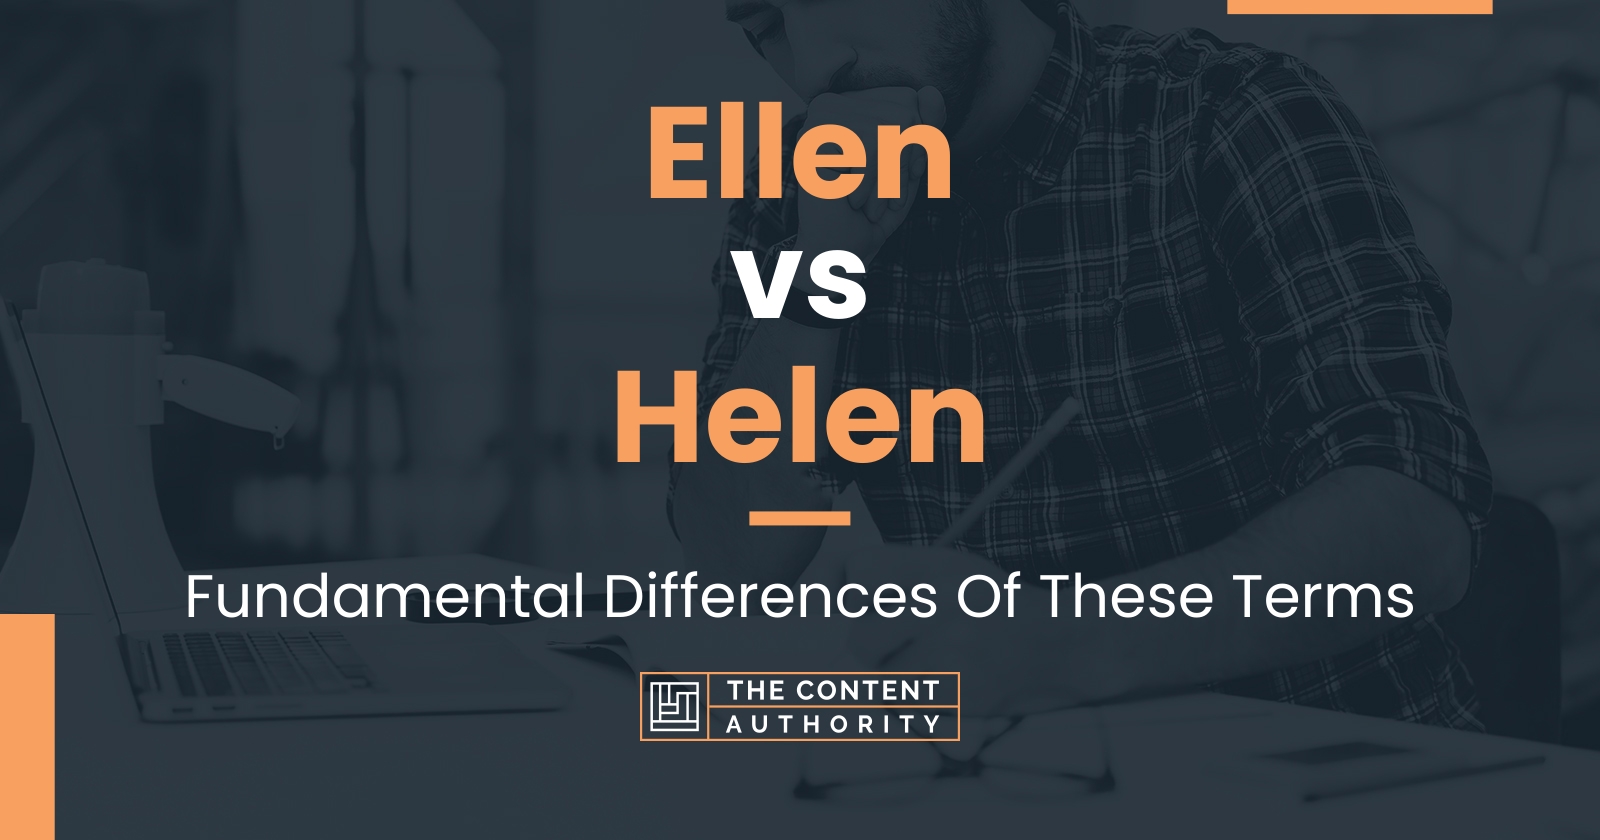 Ellen vs Helen: Fundamental Differences Of These Terms